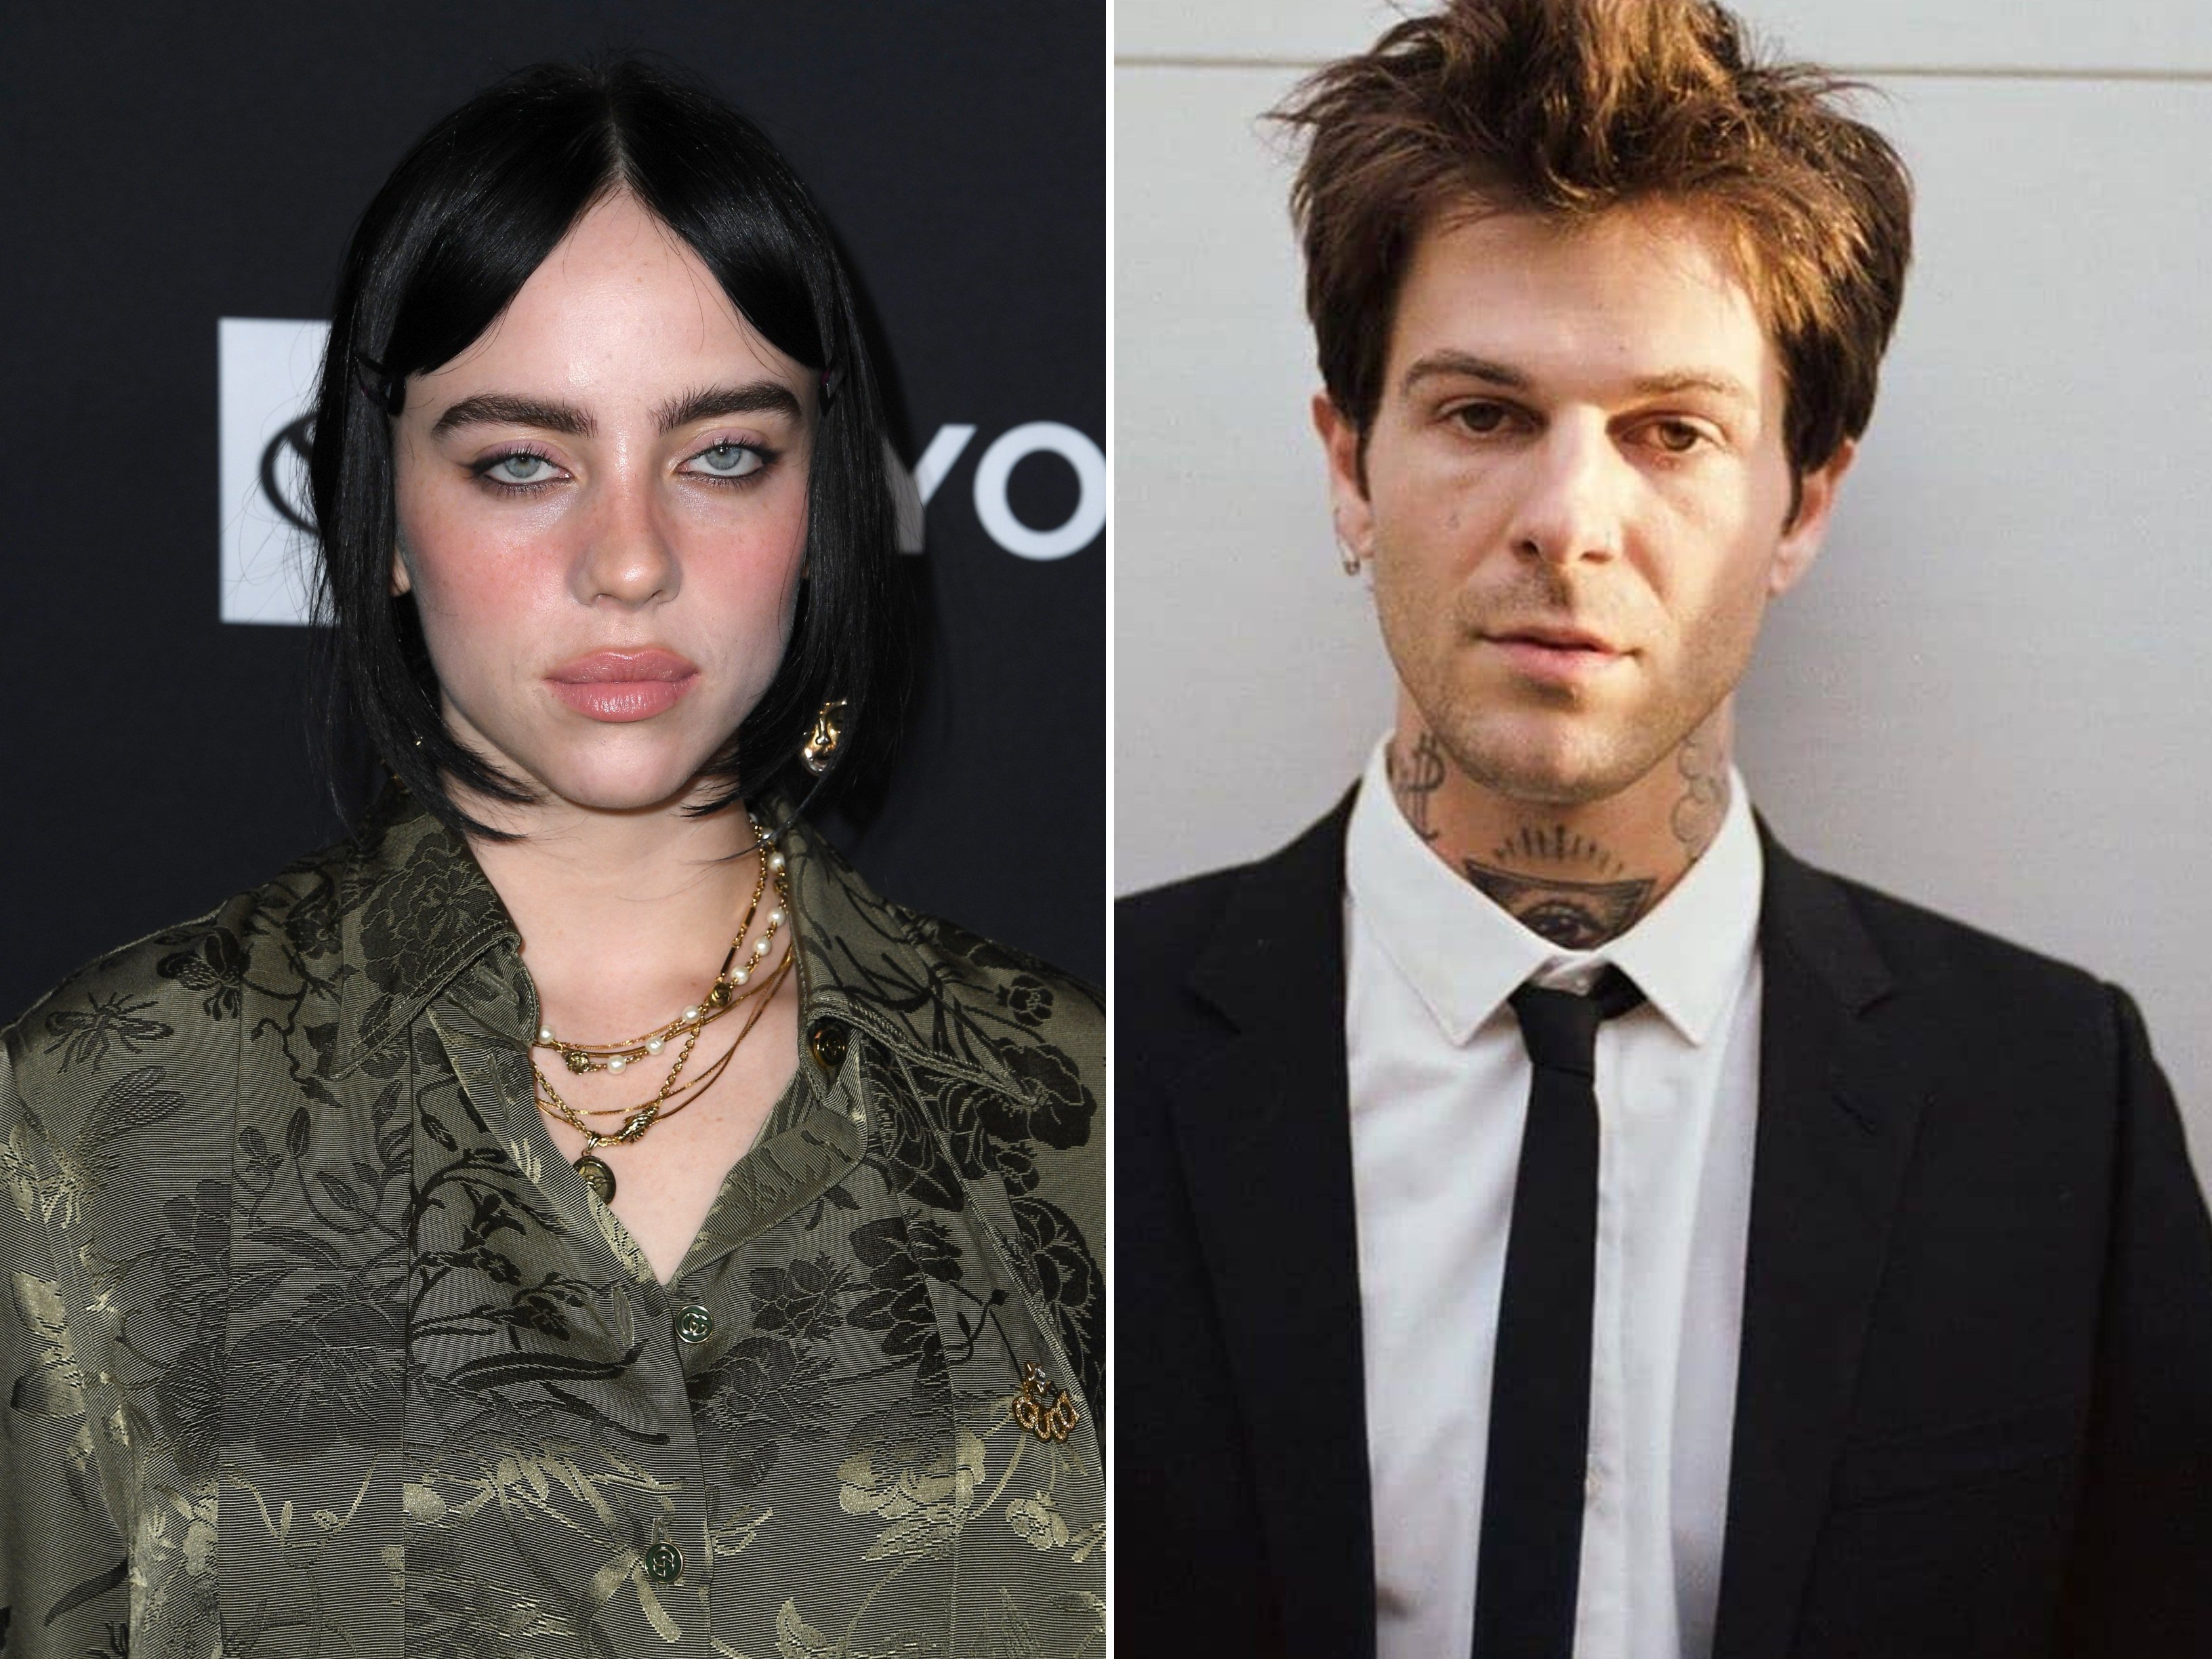 Billie Eilish is rumoured to be in a romantic relationship with Jesse Rutherford. Photos: Getty Images, @jesserutherfordthenbhd/Instagram